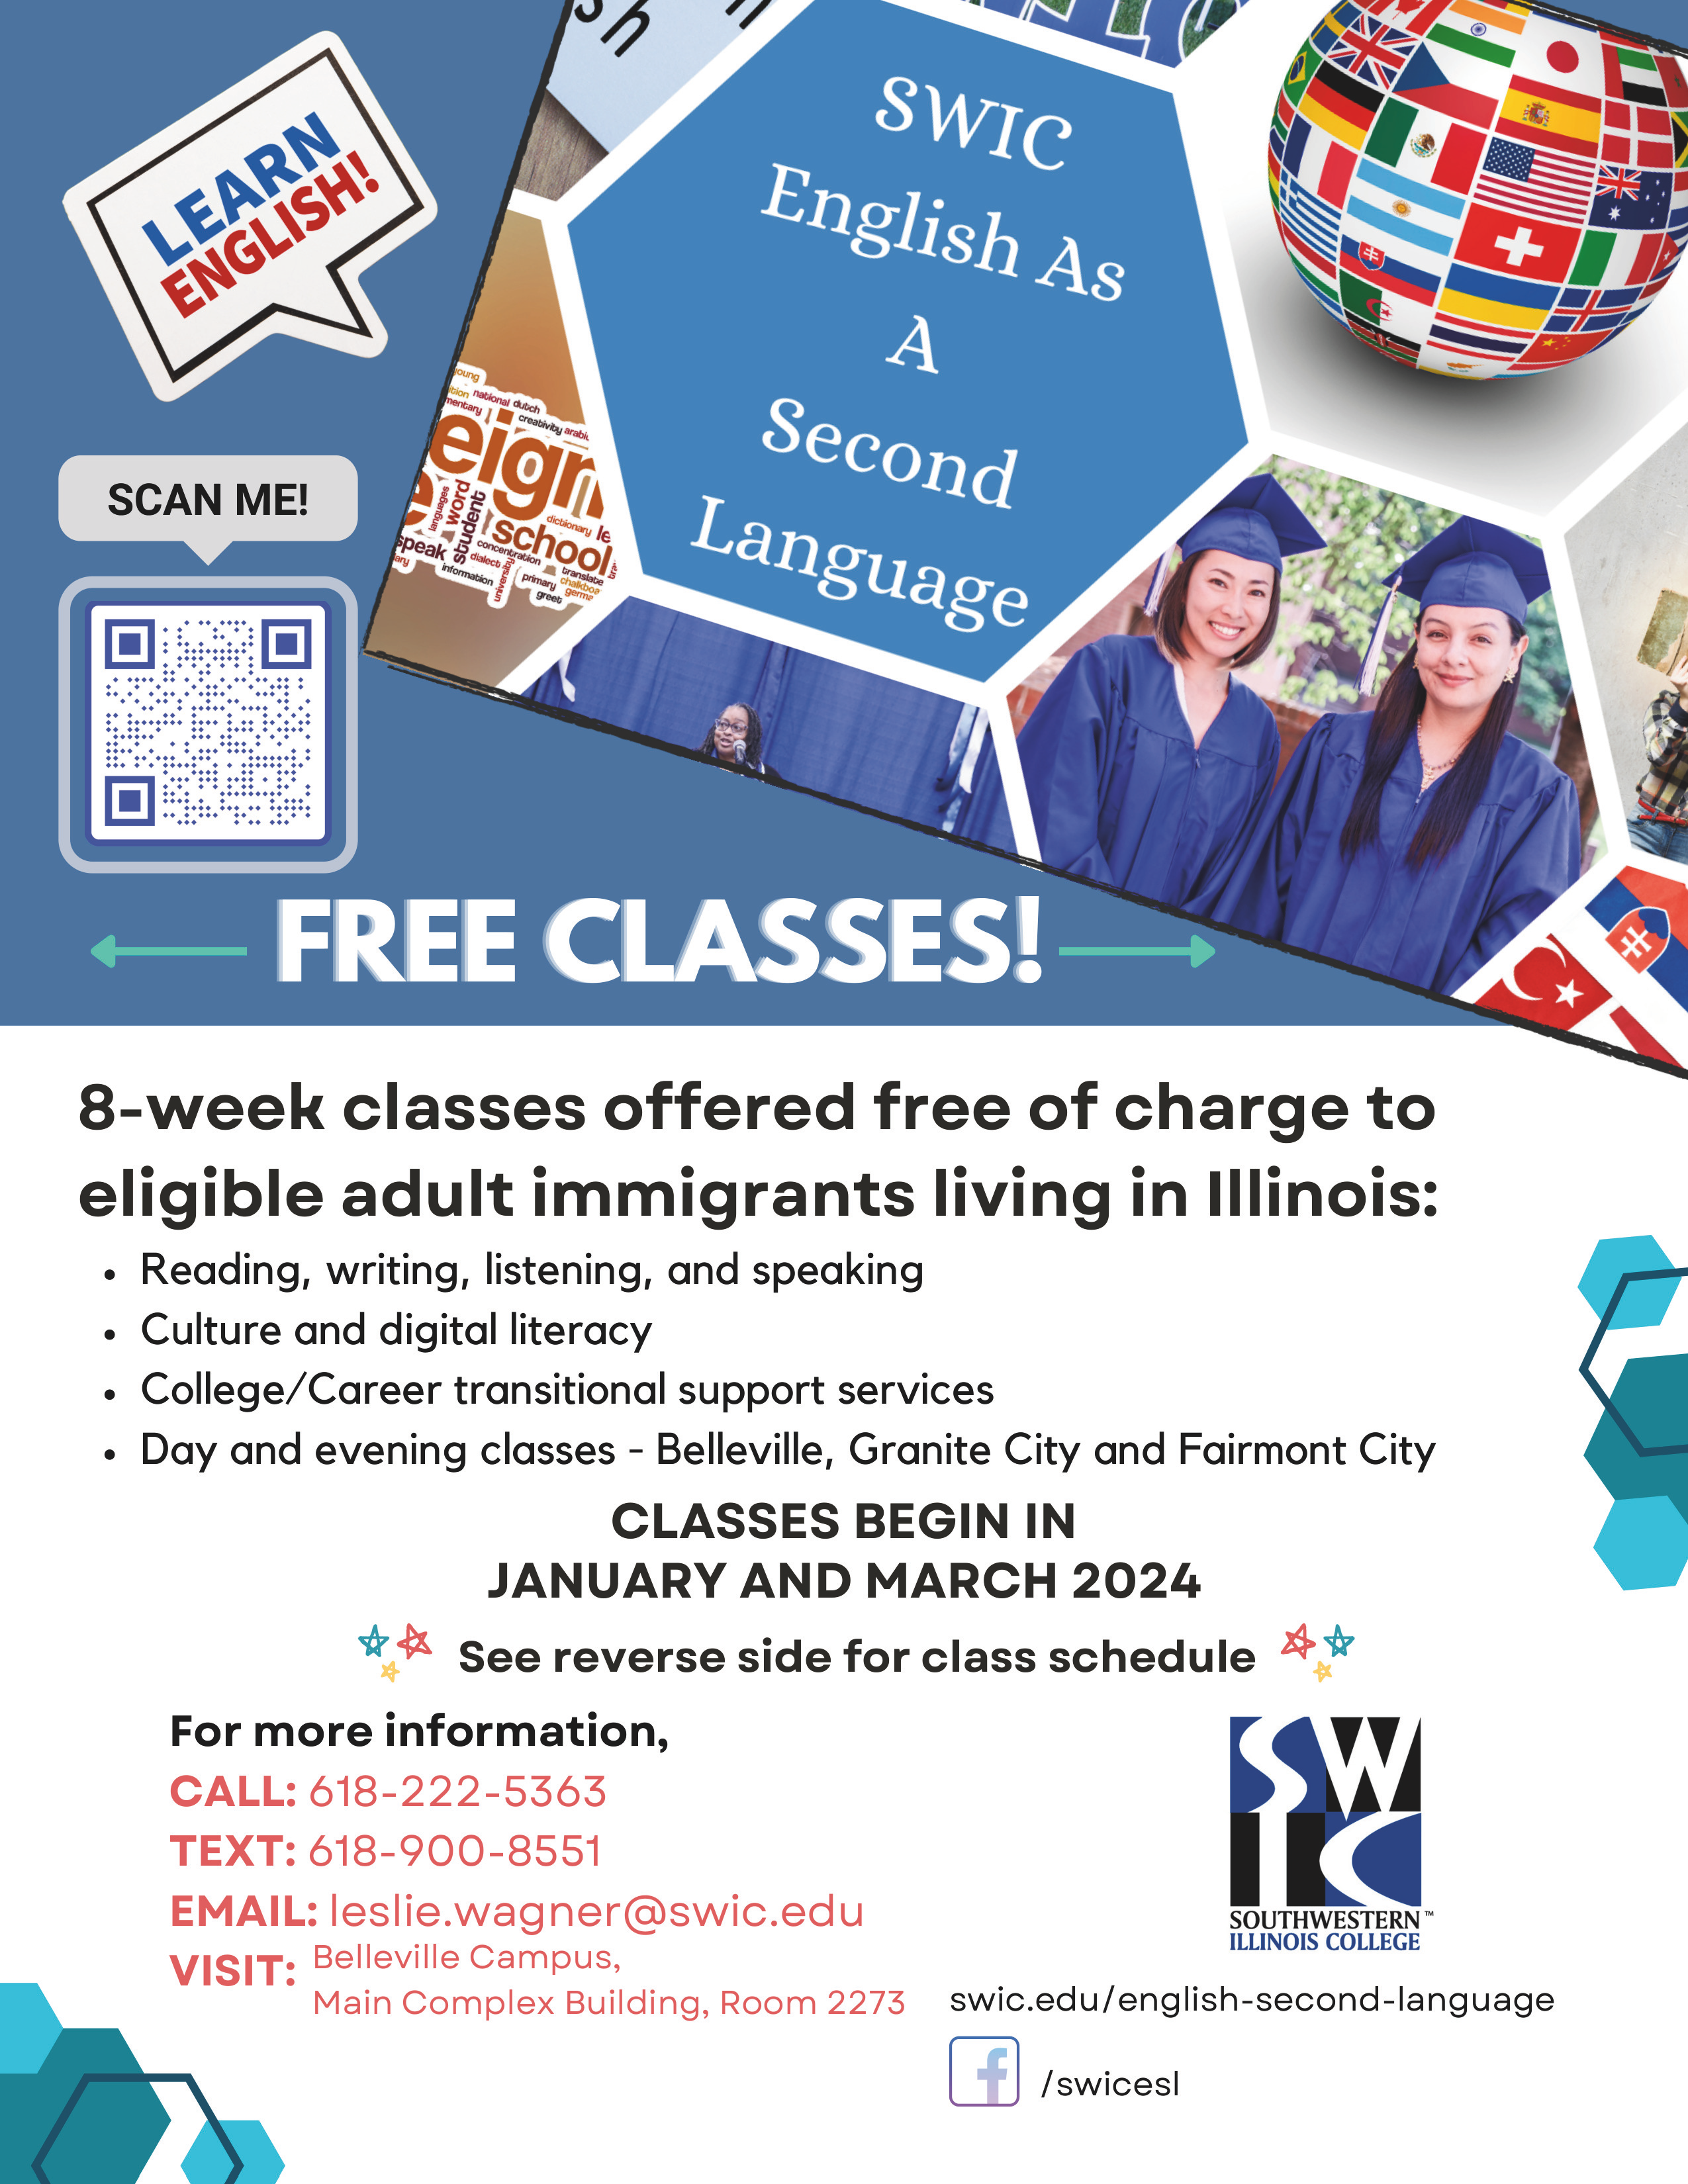 Au Pair Online English Classes, Accredited Courses